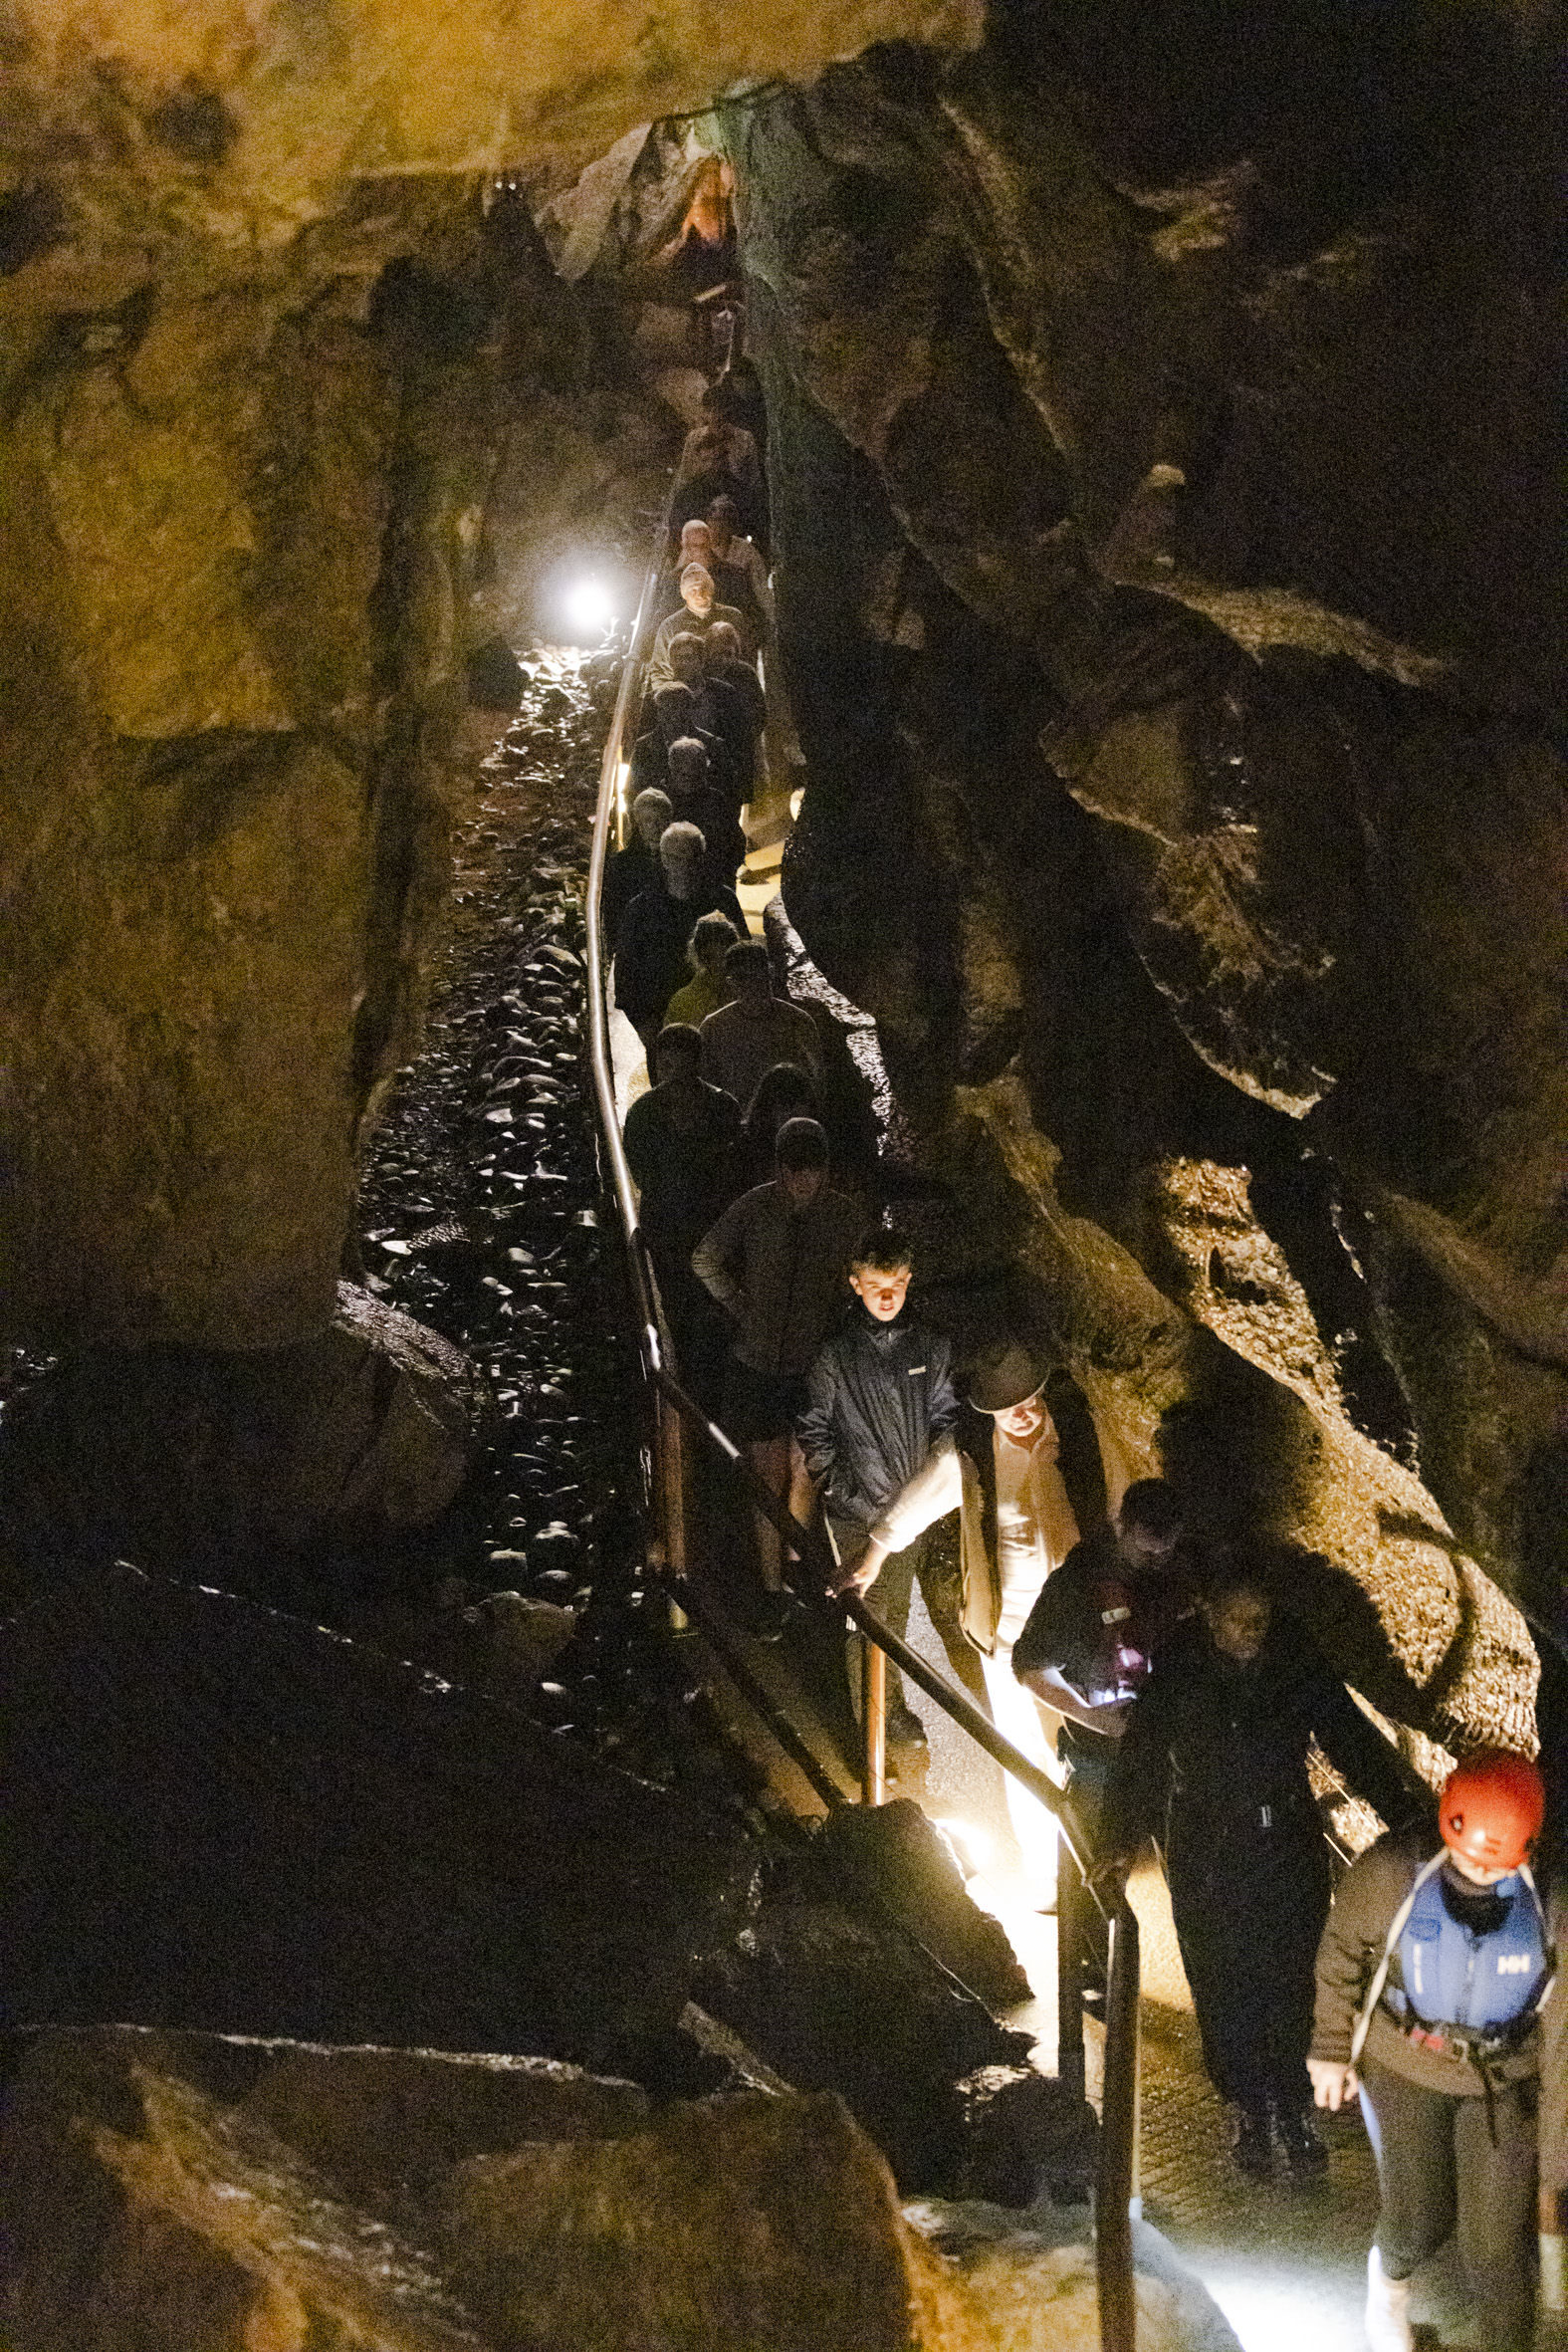 Singer Ruby Philogene leads the people out of the cave while singing all the way.